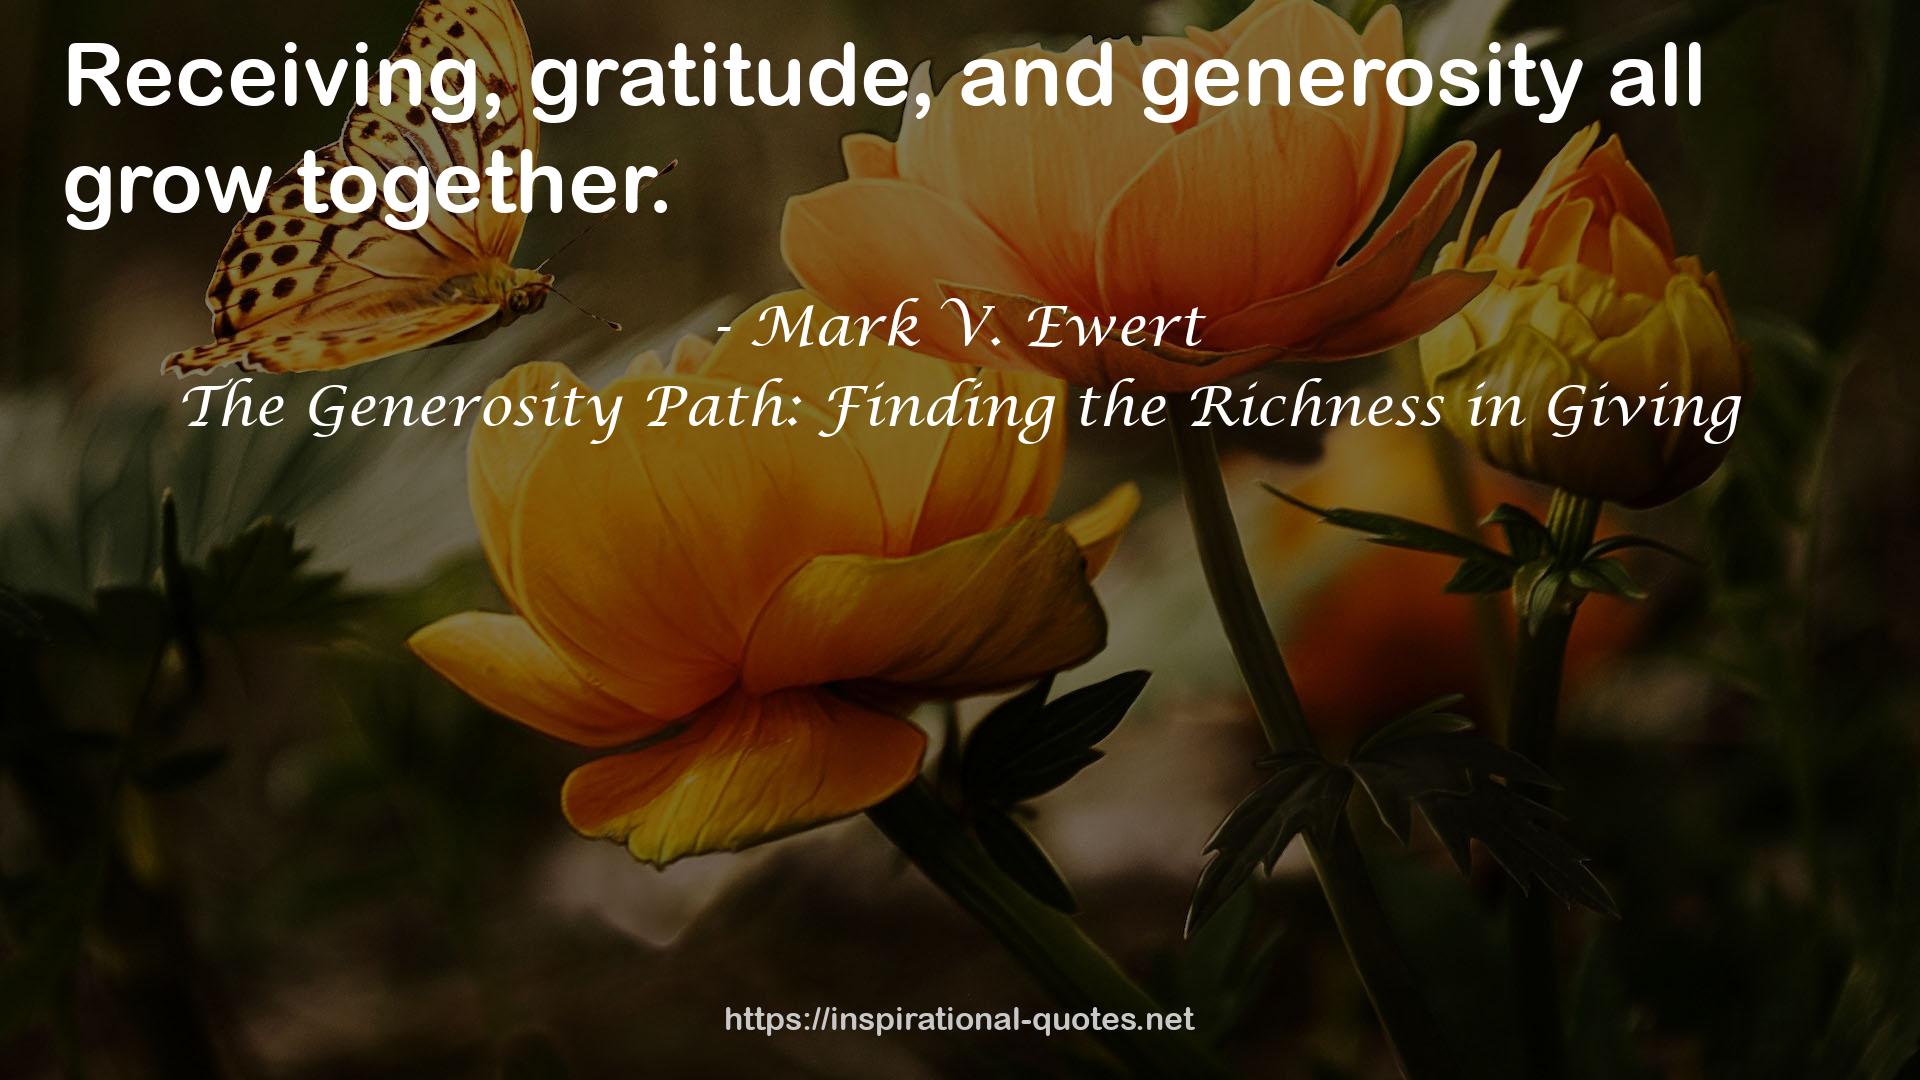 The Generosity Path: Finding the Richness in Giving QUOTES